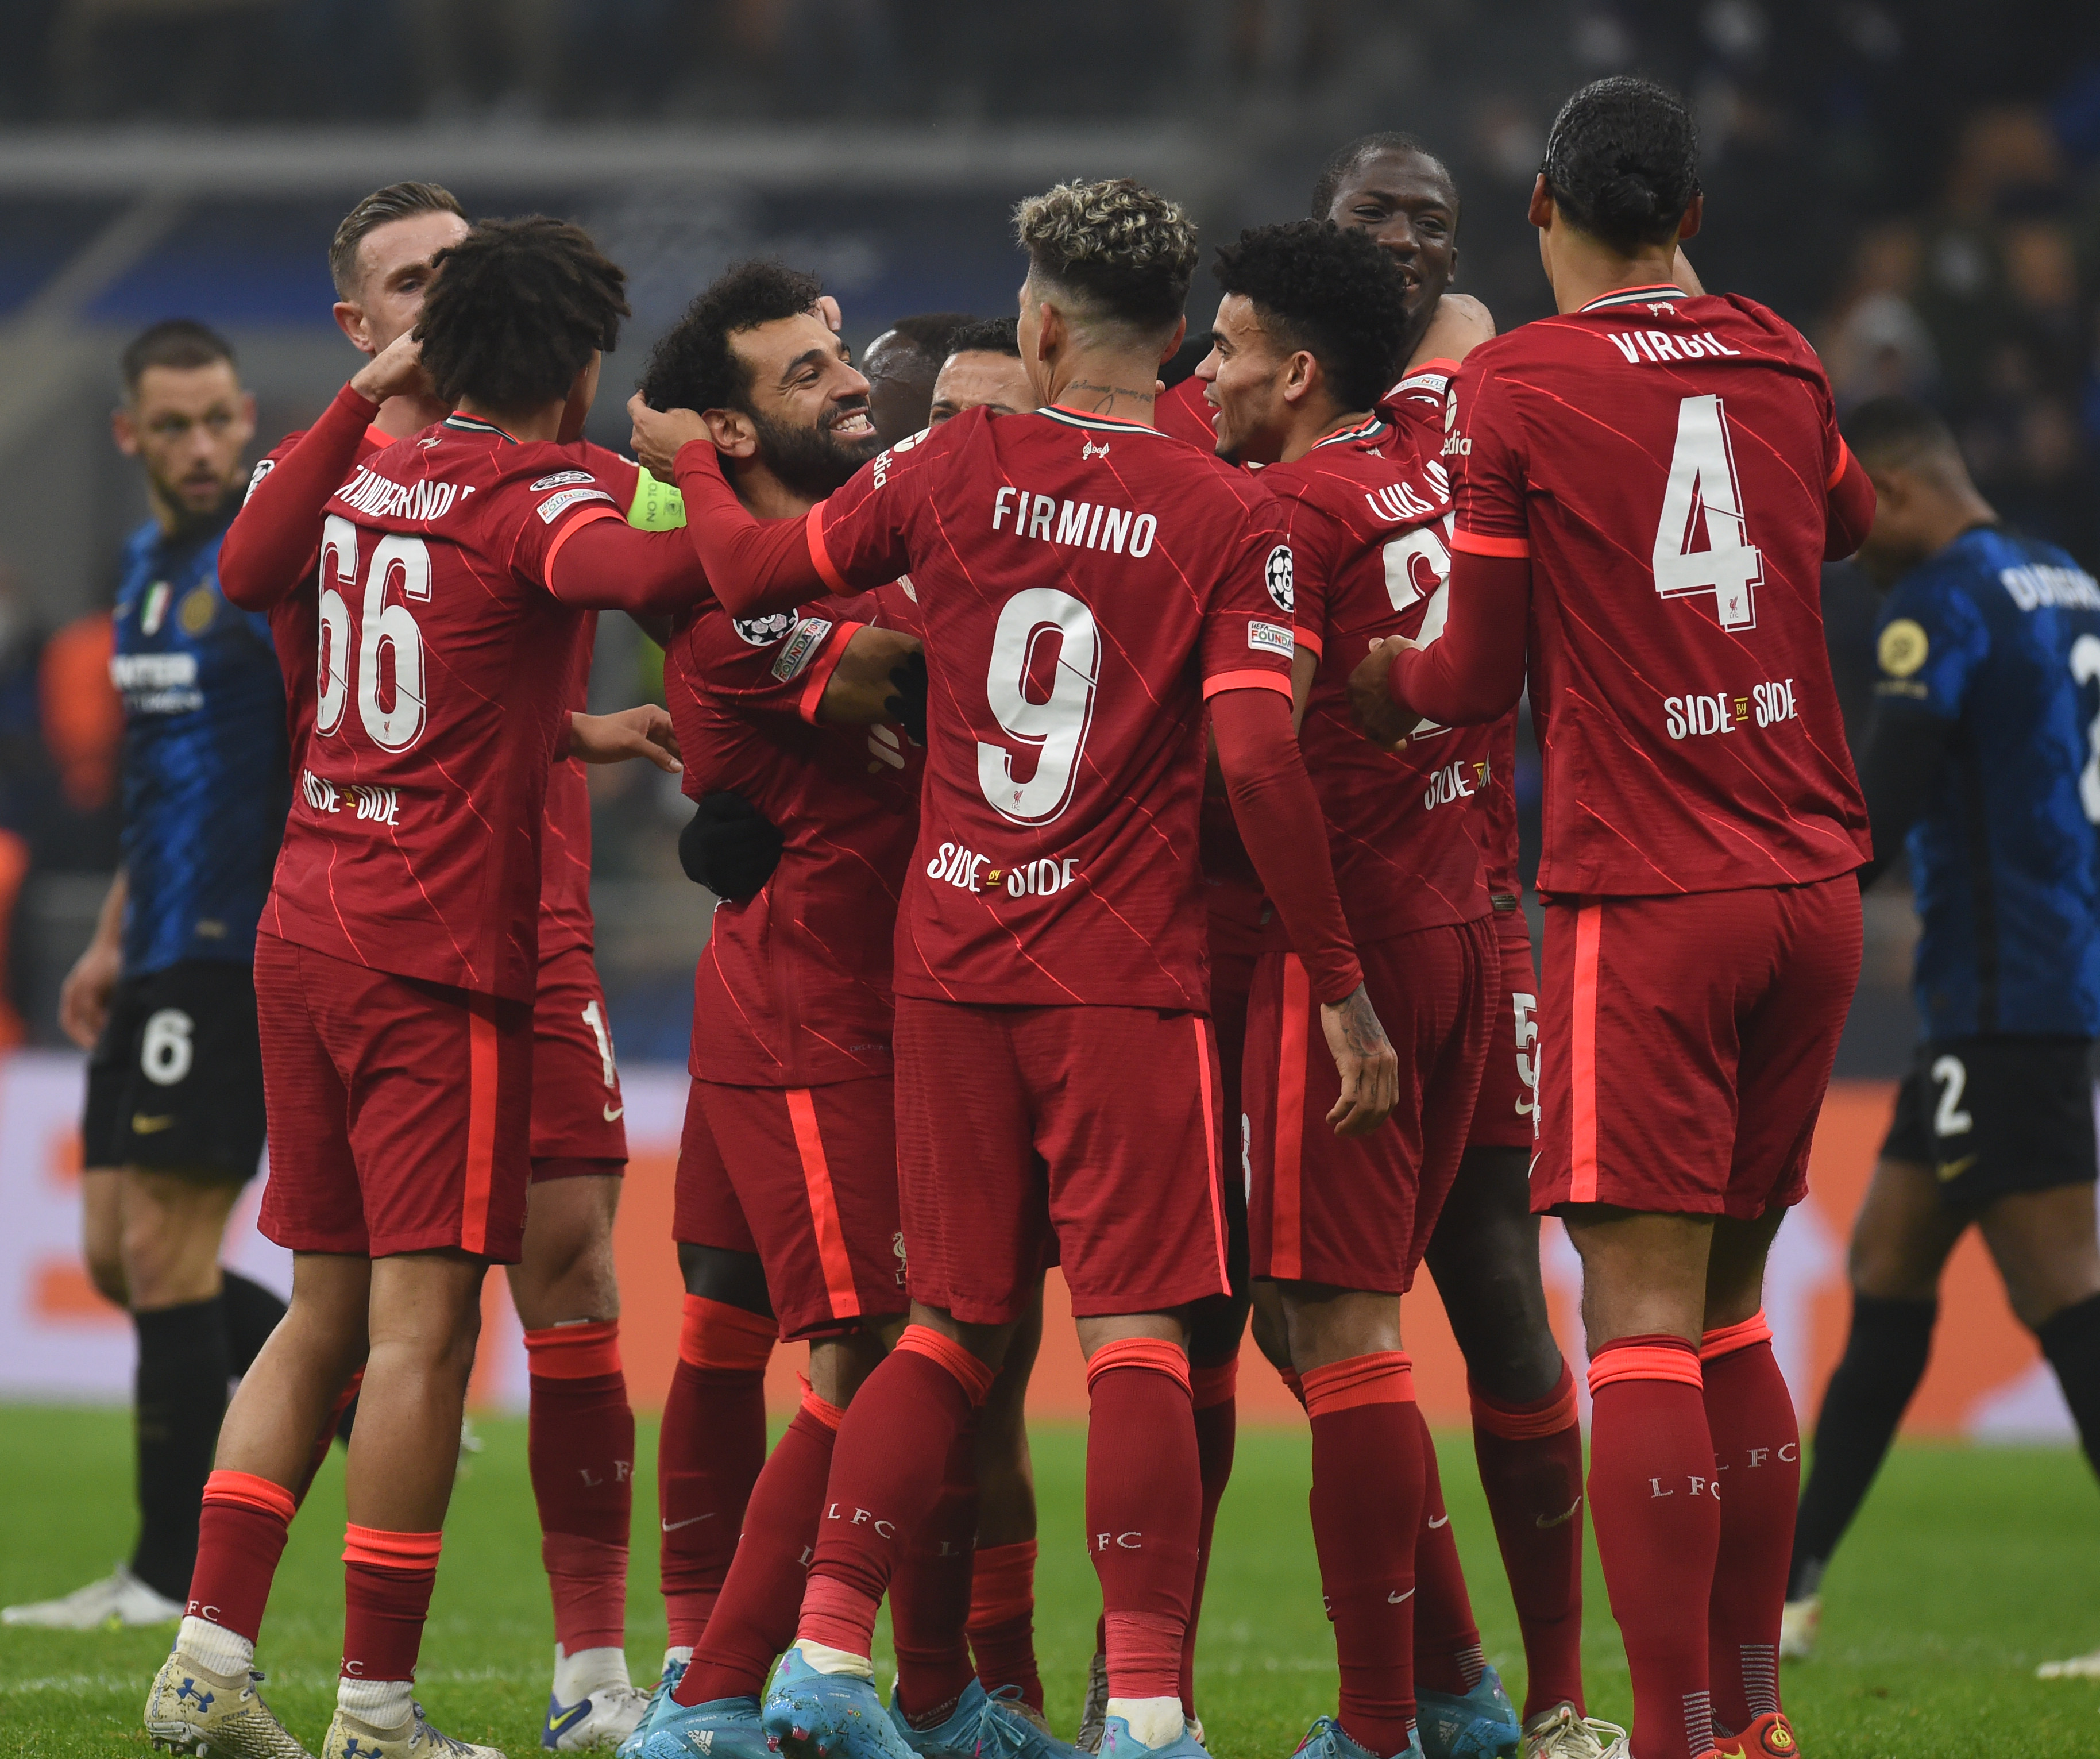 Inter Milan 0-2 Liverpool Highlights: Liverpool score two second-half goals through Firmino and Mo Salah to beat Inter in the 1st Leg of the Last 16